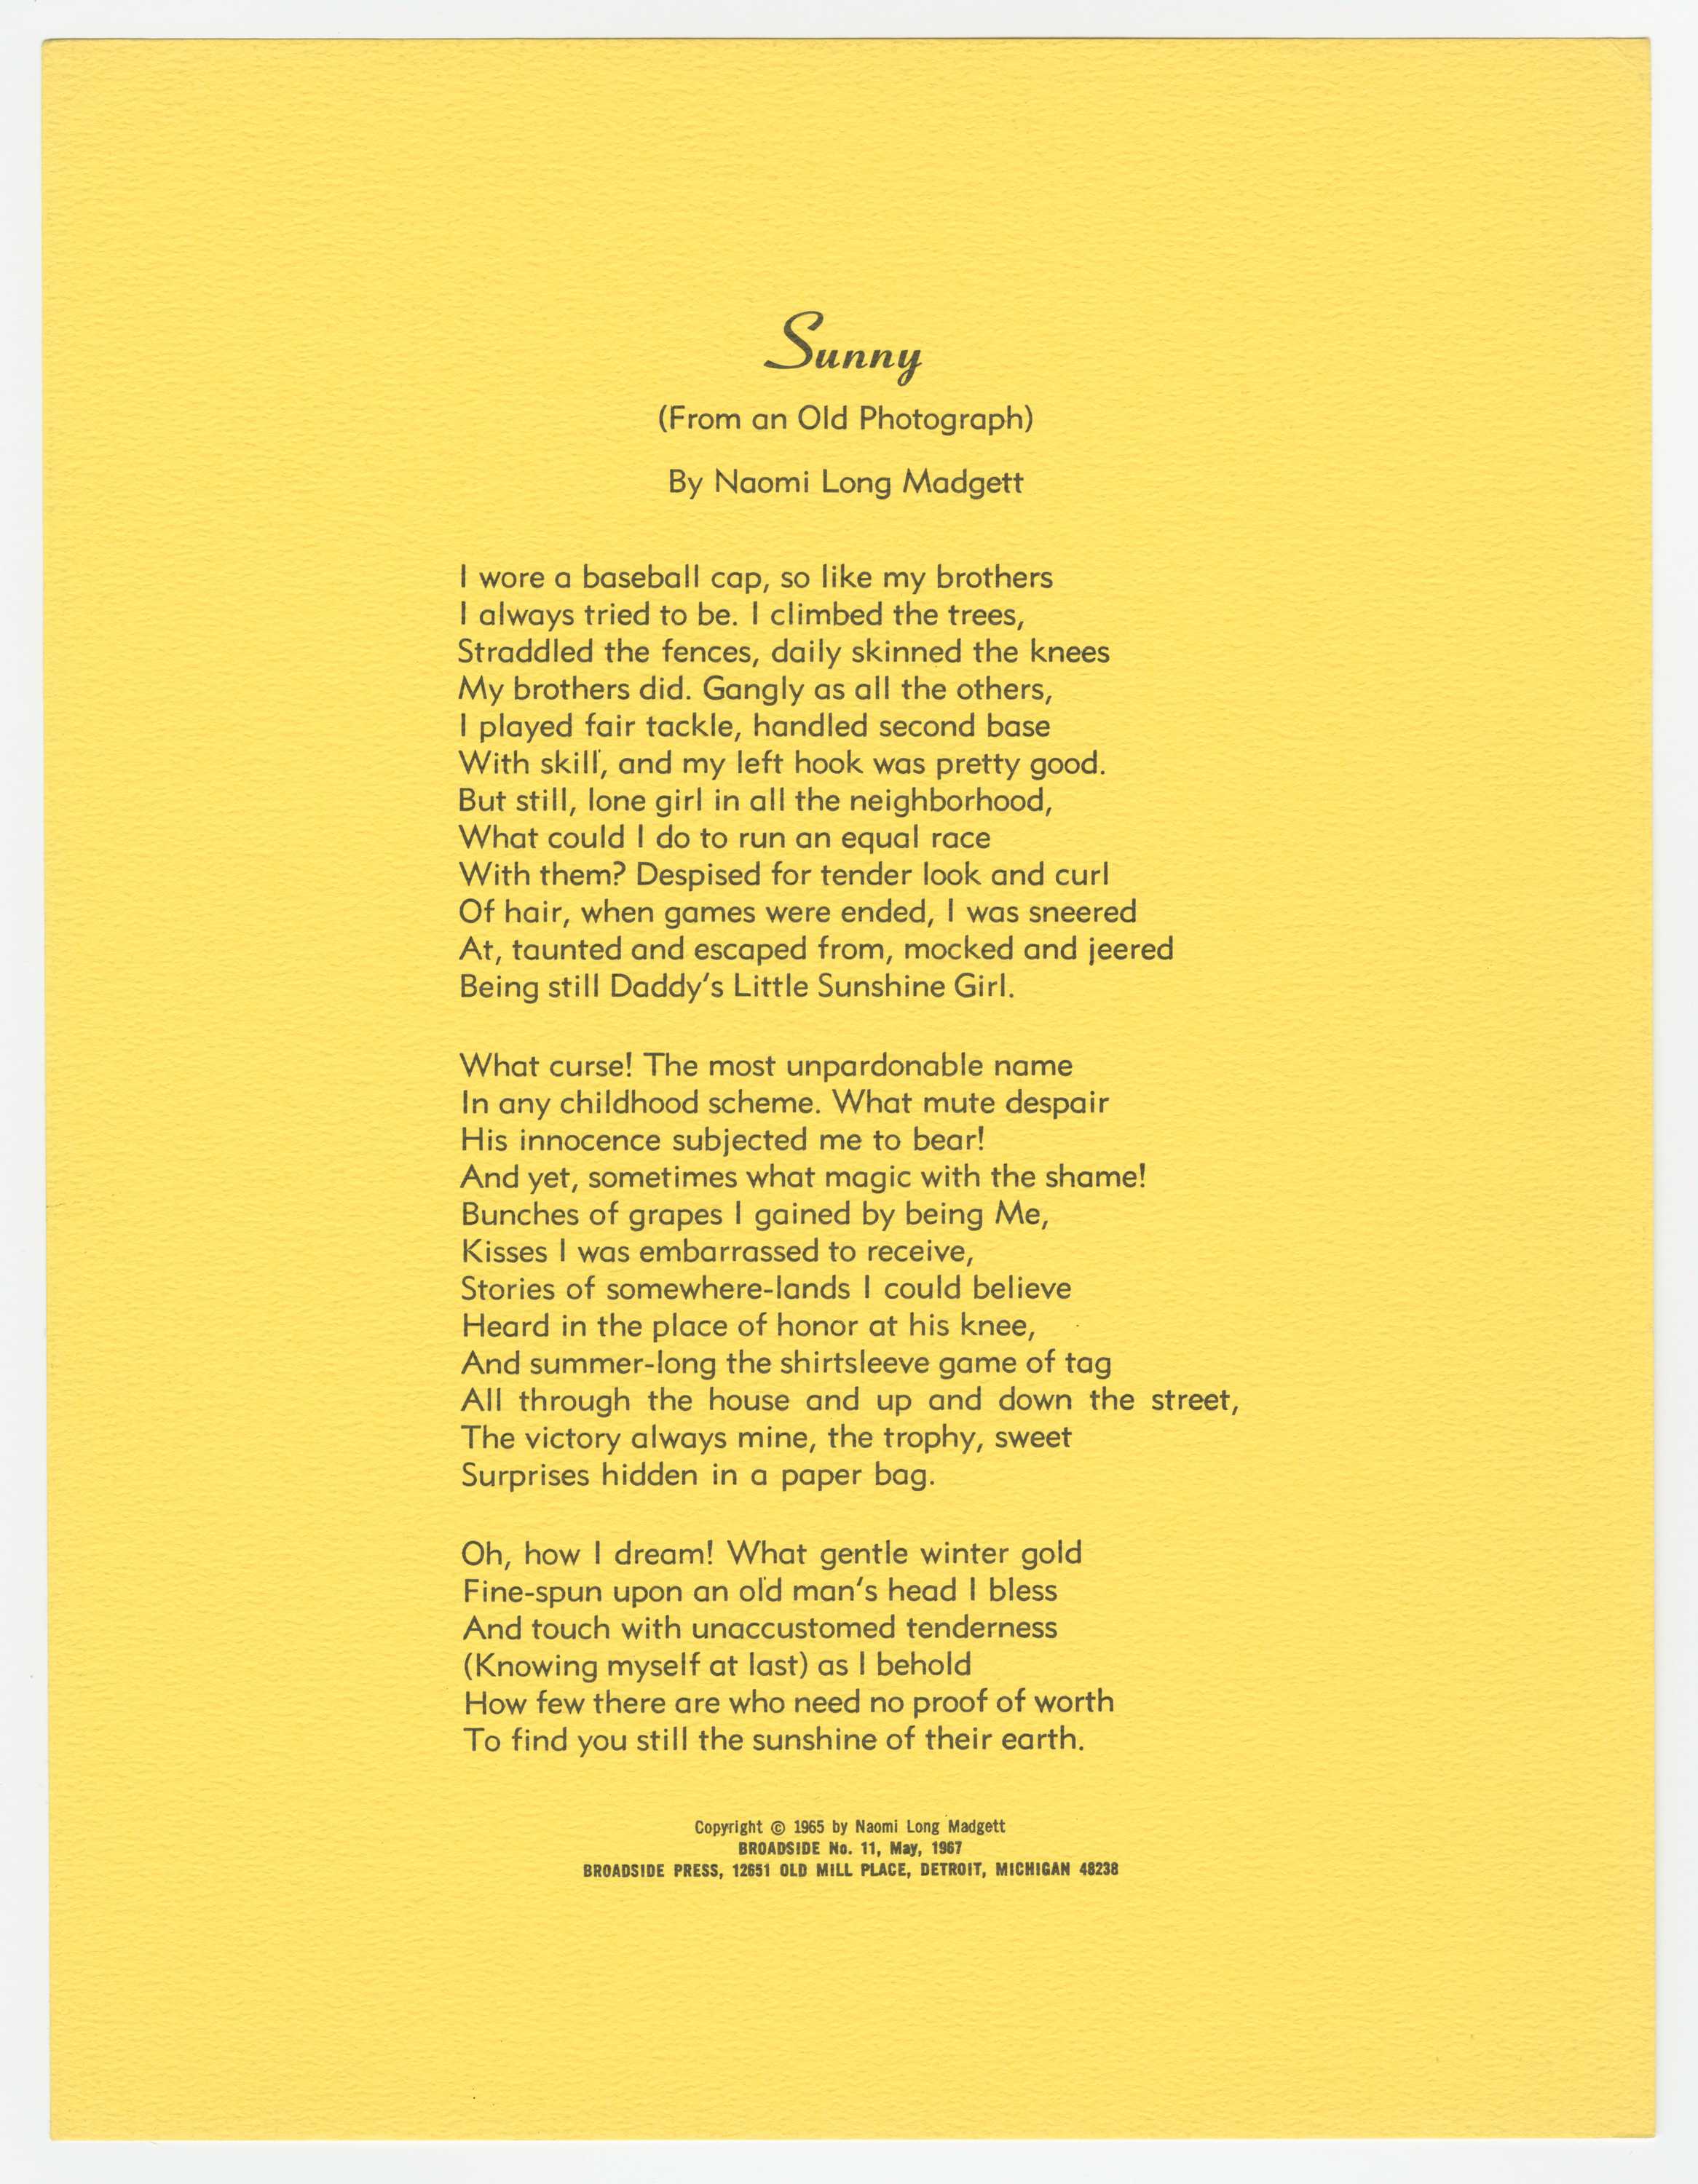 A poem titled Sunny: (From an Old Photograph) written by Naomi Long Madgett and published by Broadside Press as Broadside No. 11. The poem is on yellow textured paper and printed in black ink.